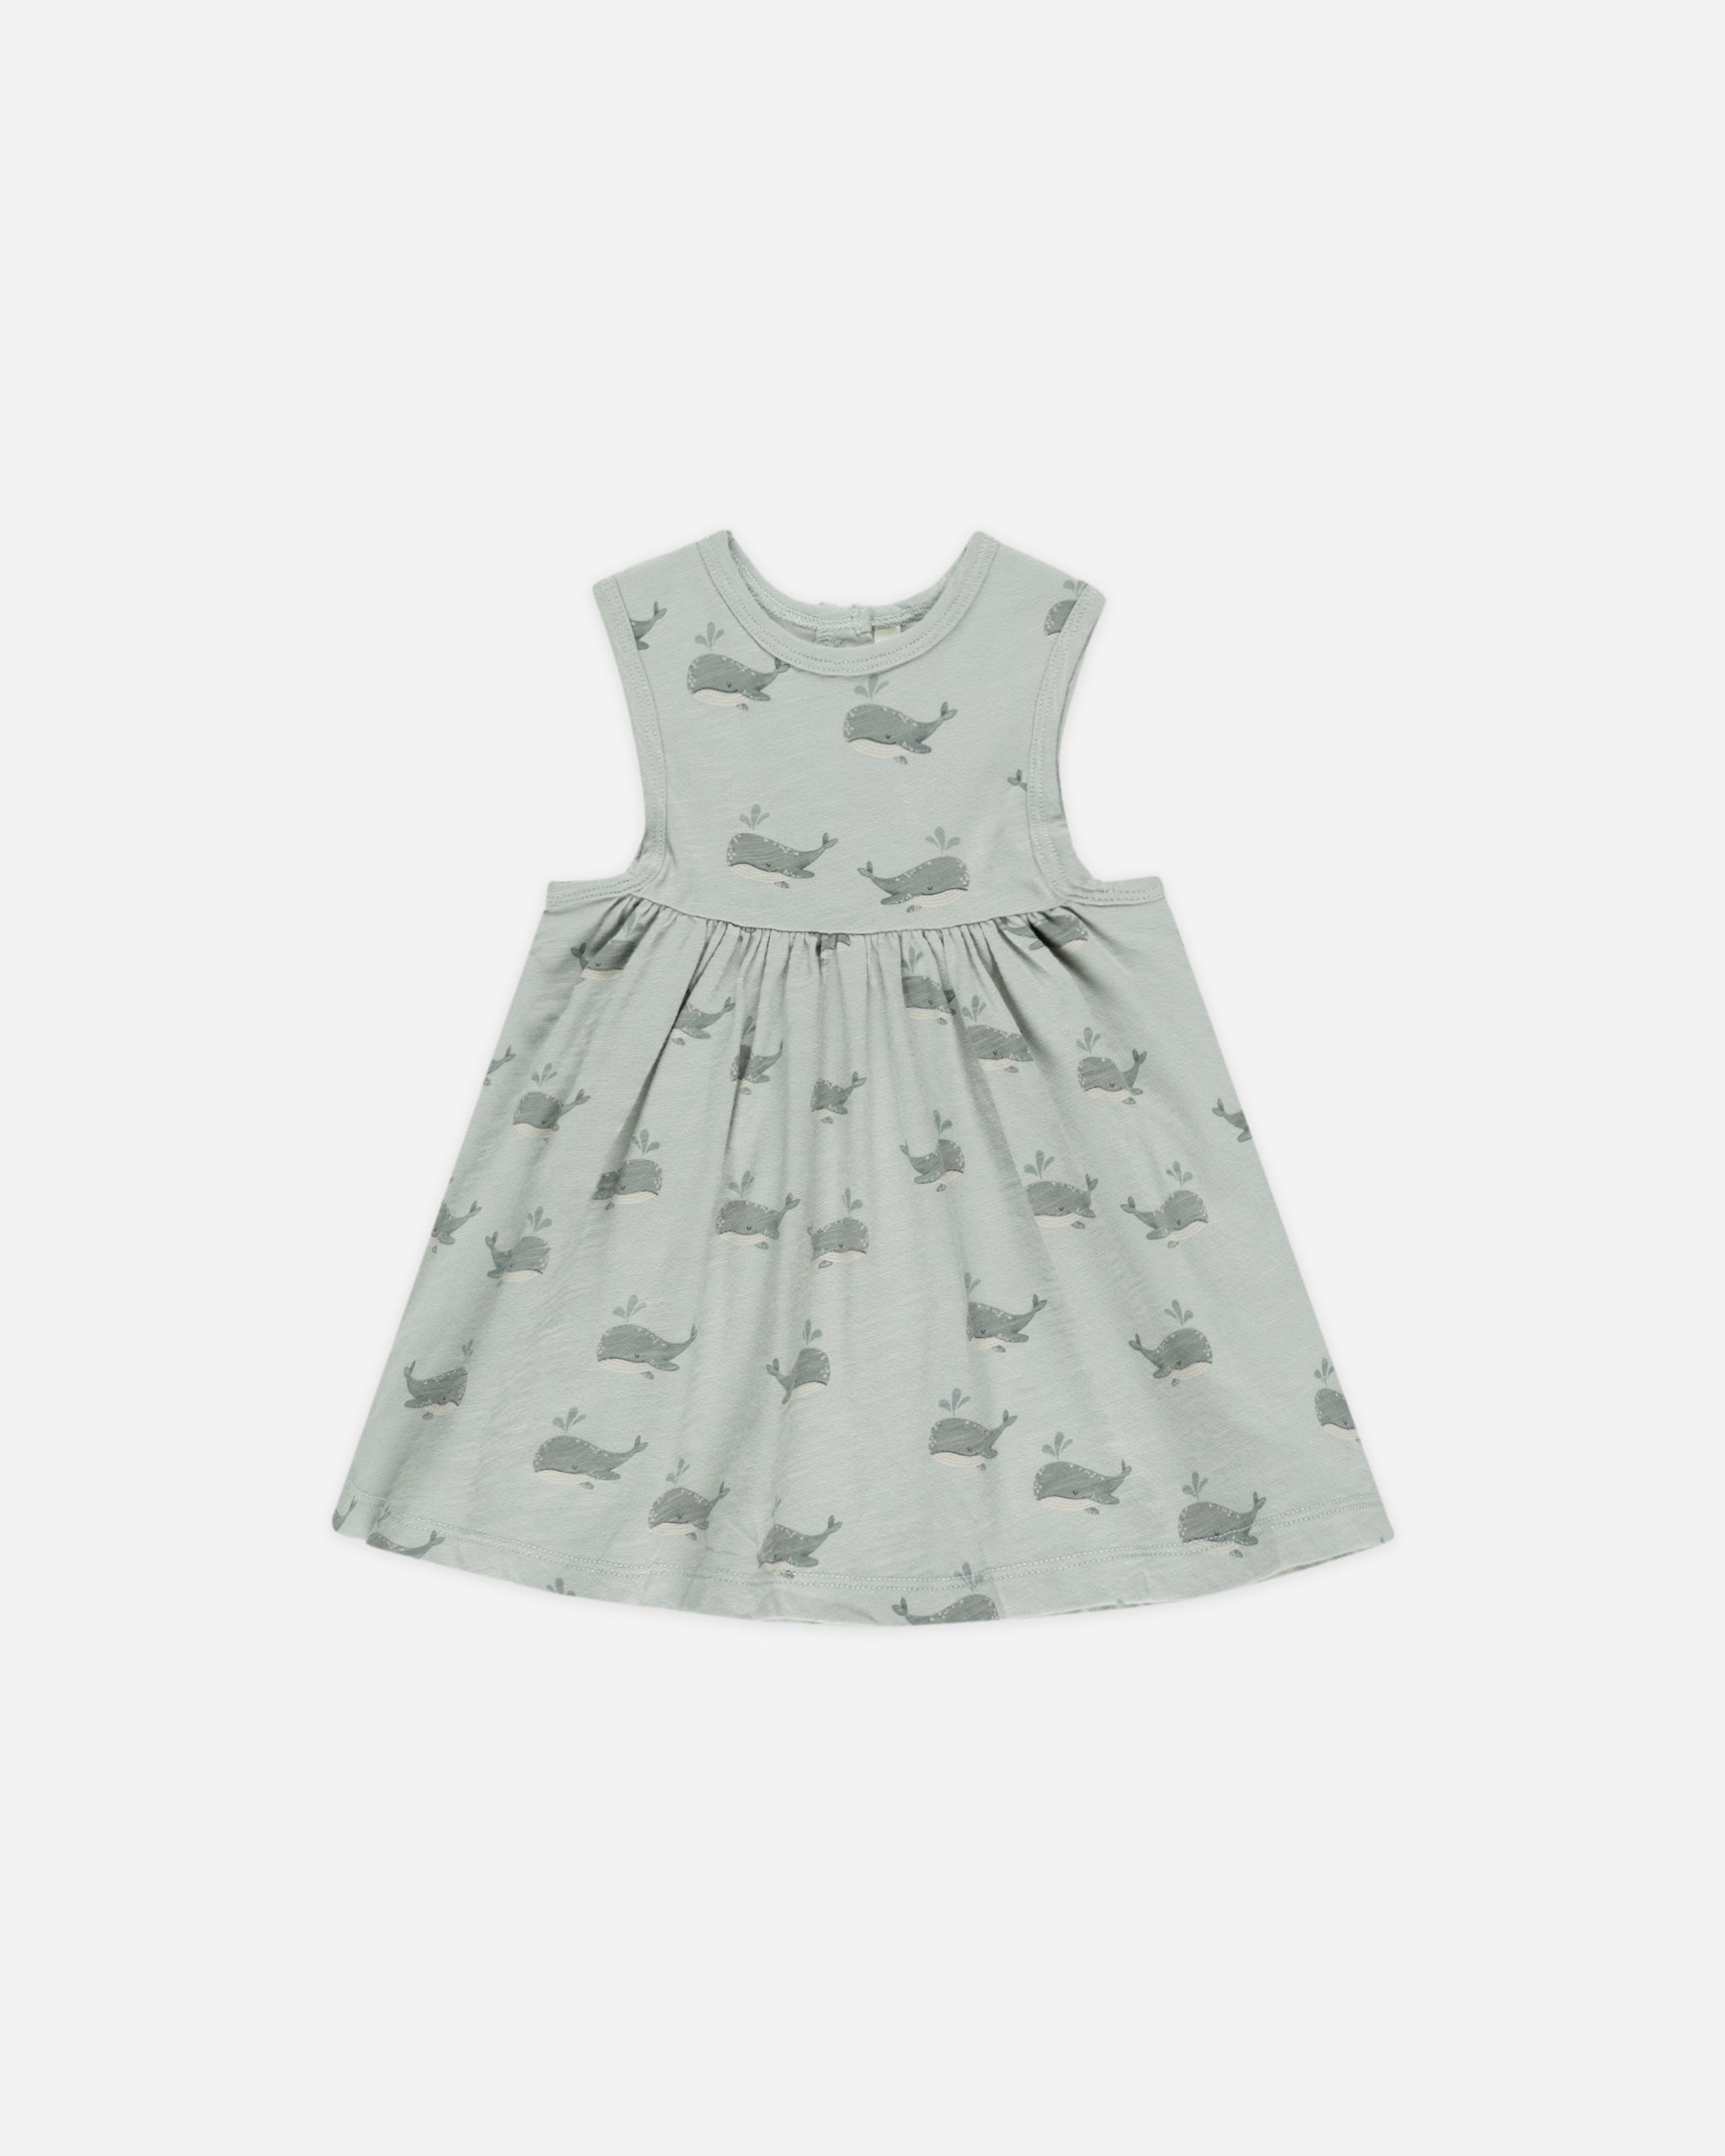 Layla Dress || Whales - Rylee + Cru | Kids Clothes | Trendy Baby Clothes | Modern Infant Outfits |